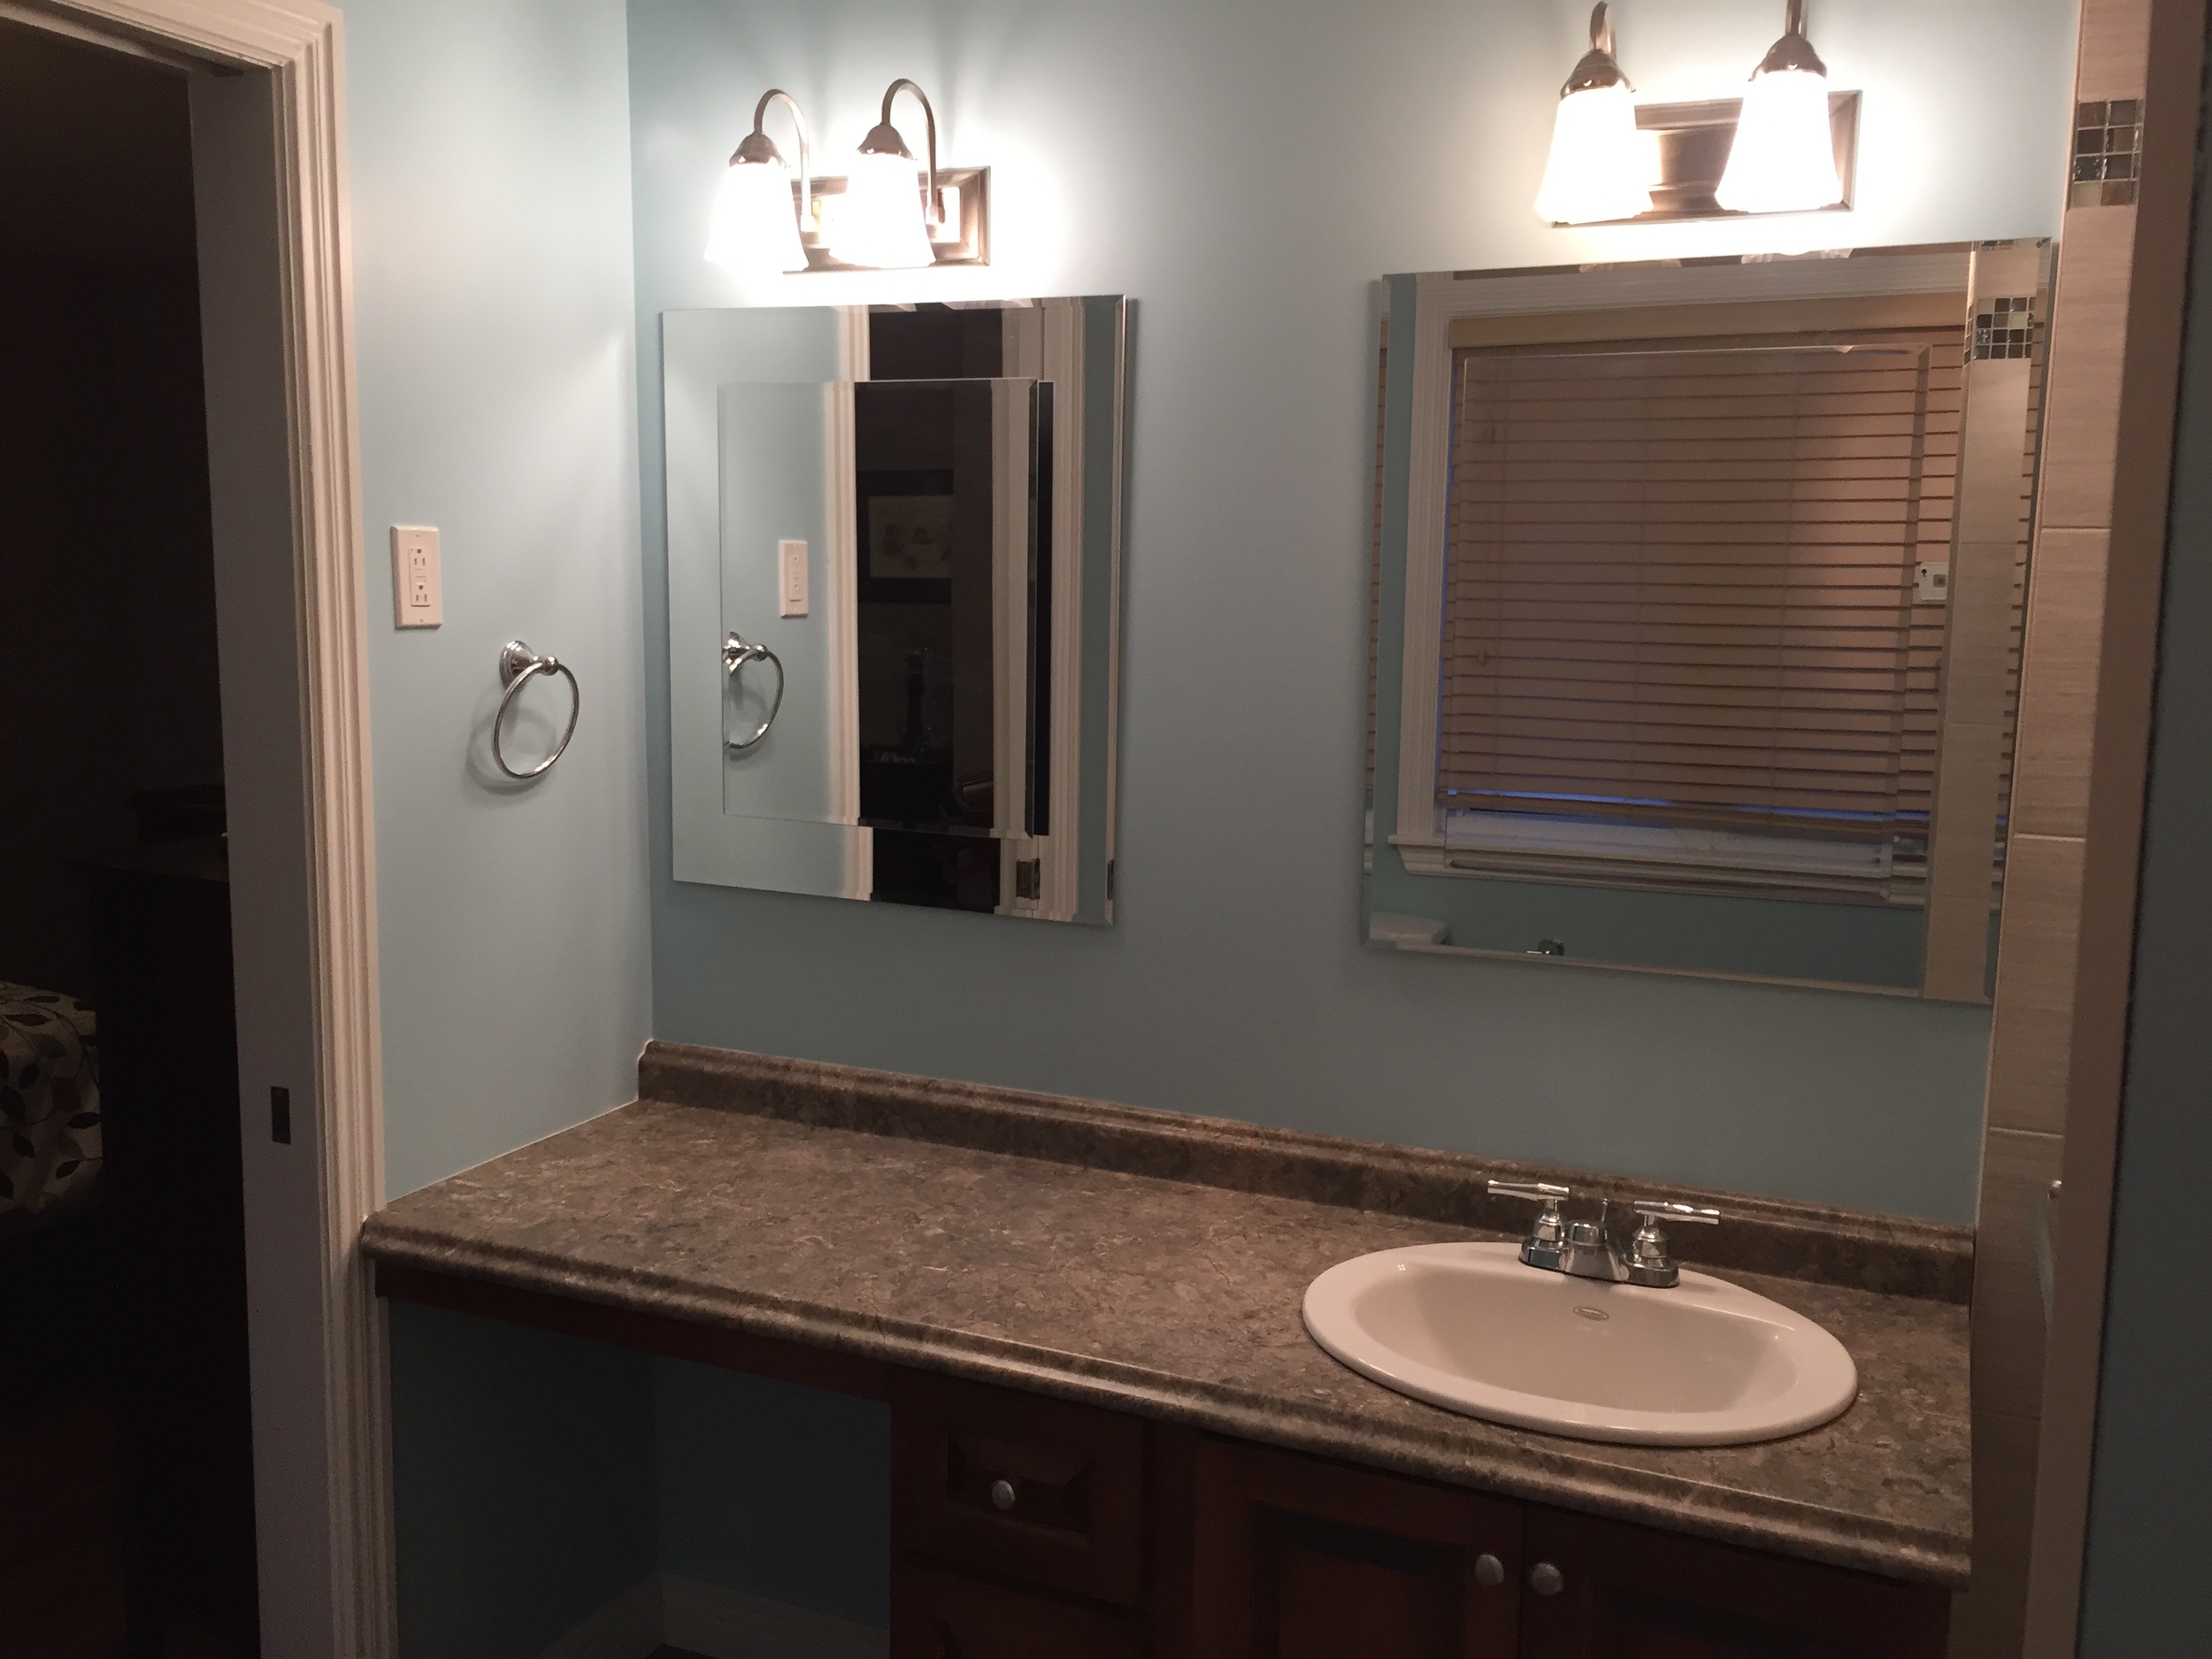 Updated lighting, mirrors and functional vanity with makeup area. 